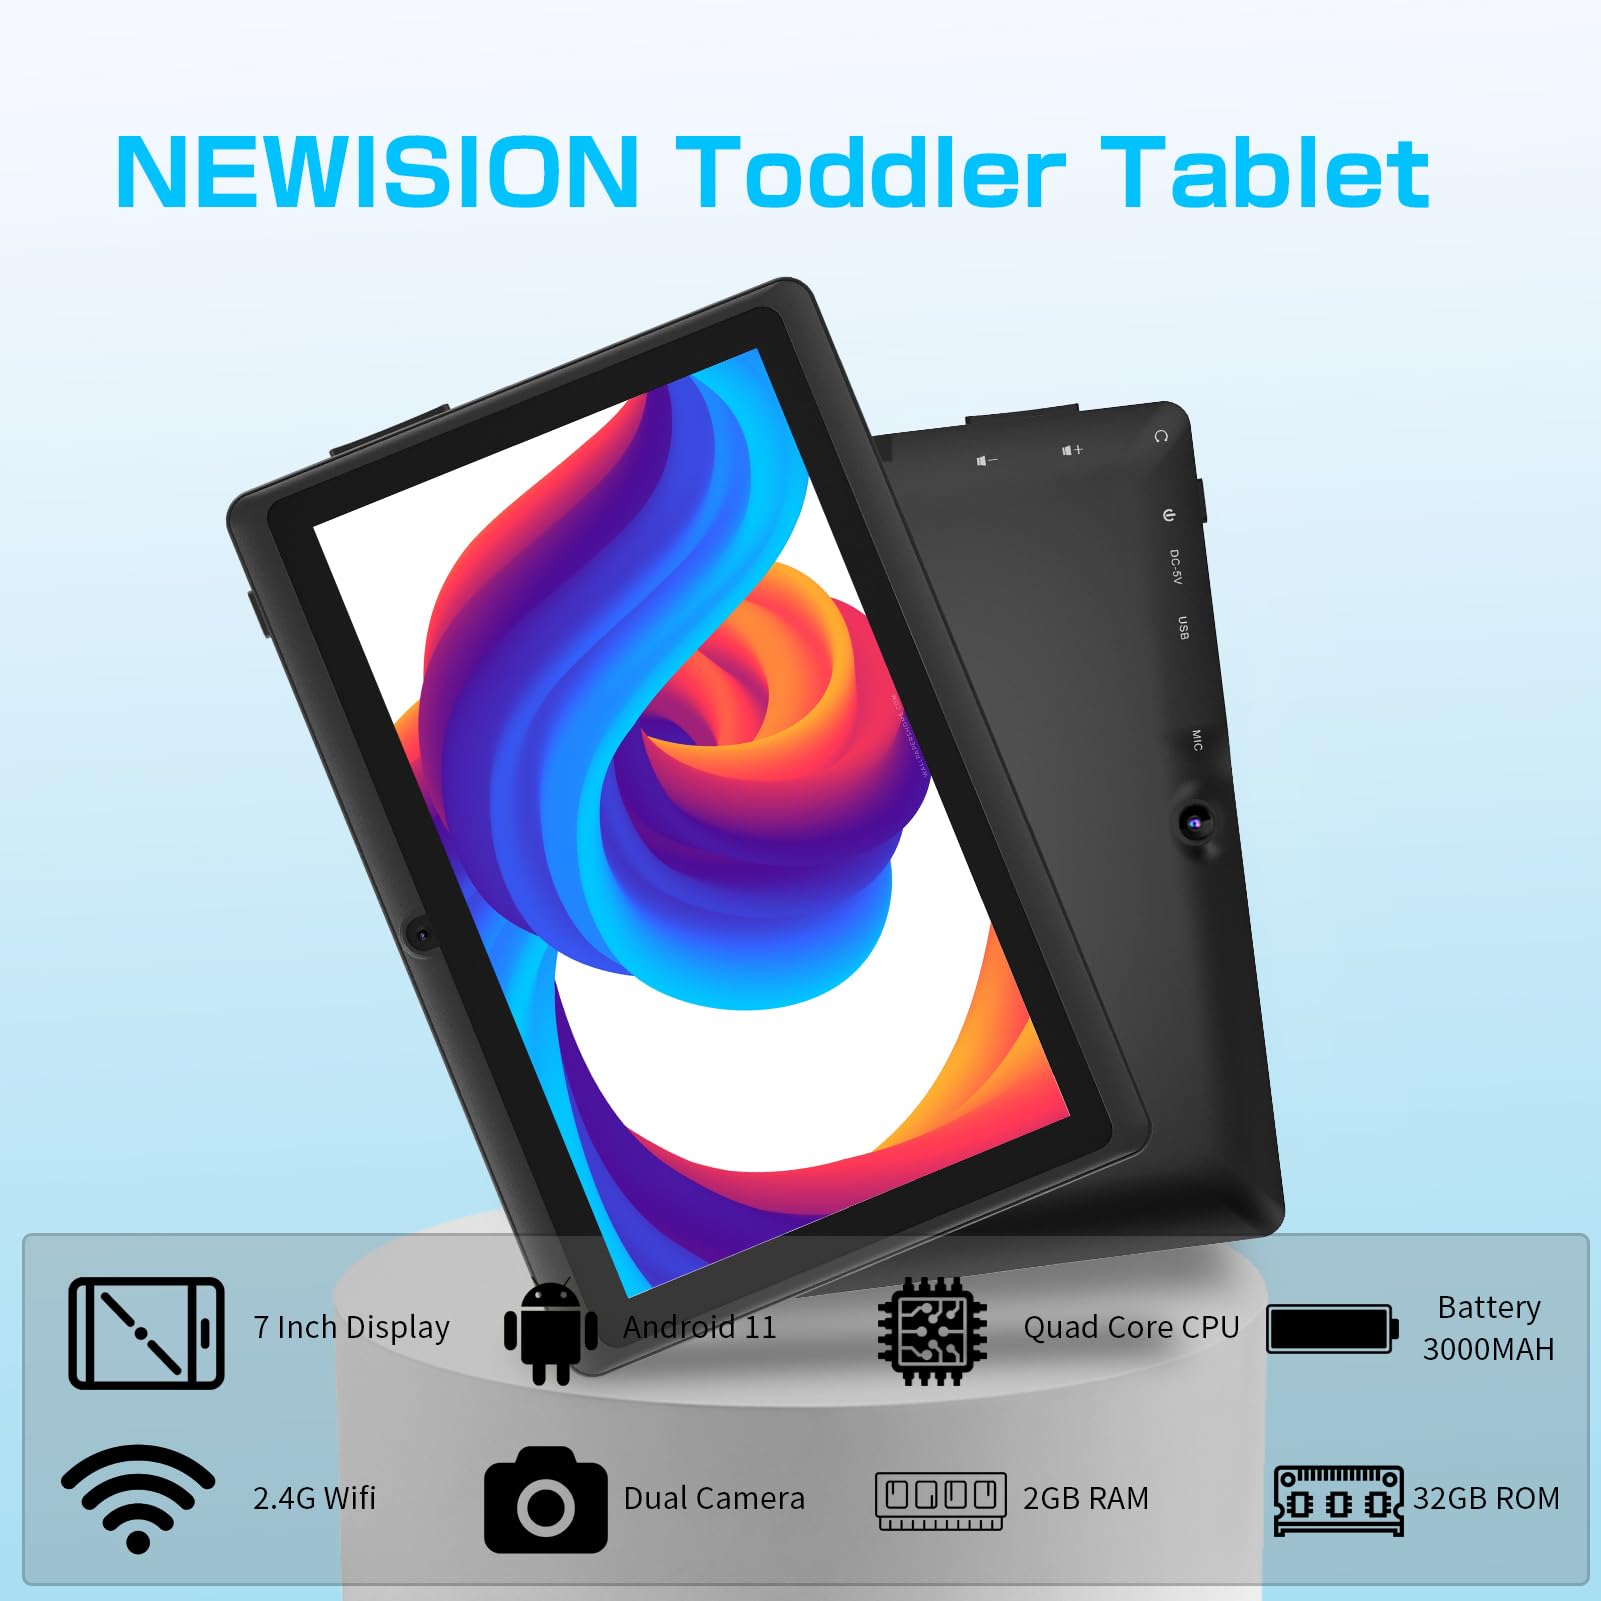 NEWISION Android Tablet for Kids,7 inch Android Tablet,32GB ROM(512GB Expand) Computer Tablet PC,Dual Camera,WiFi,Type C,Include Tablet Case (Blue)